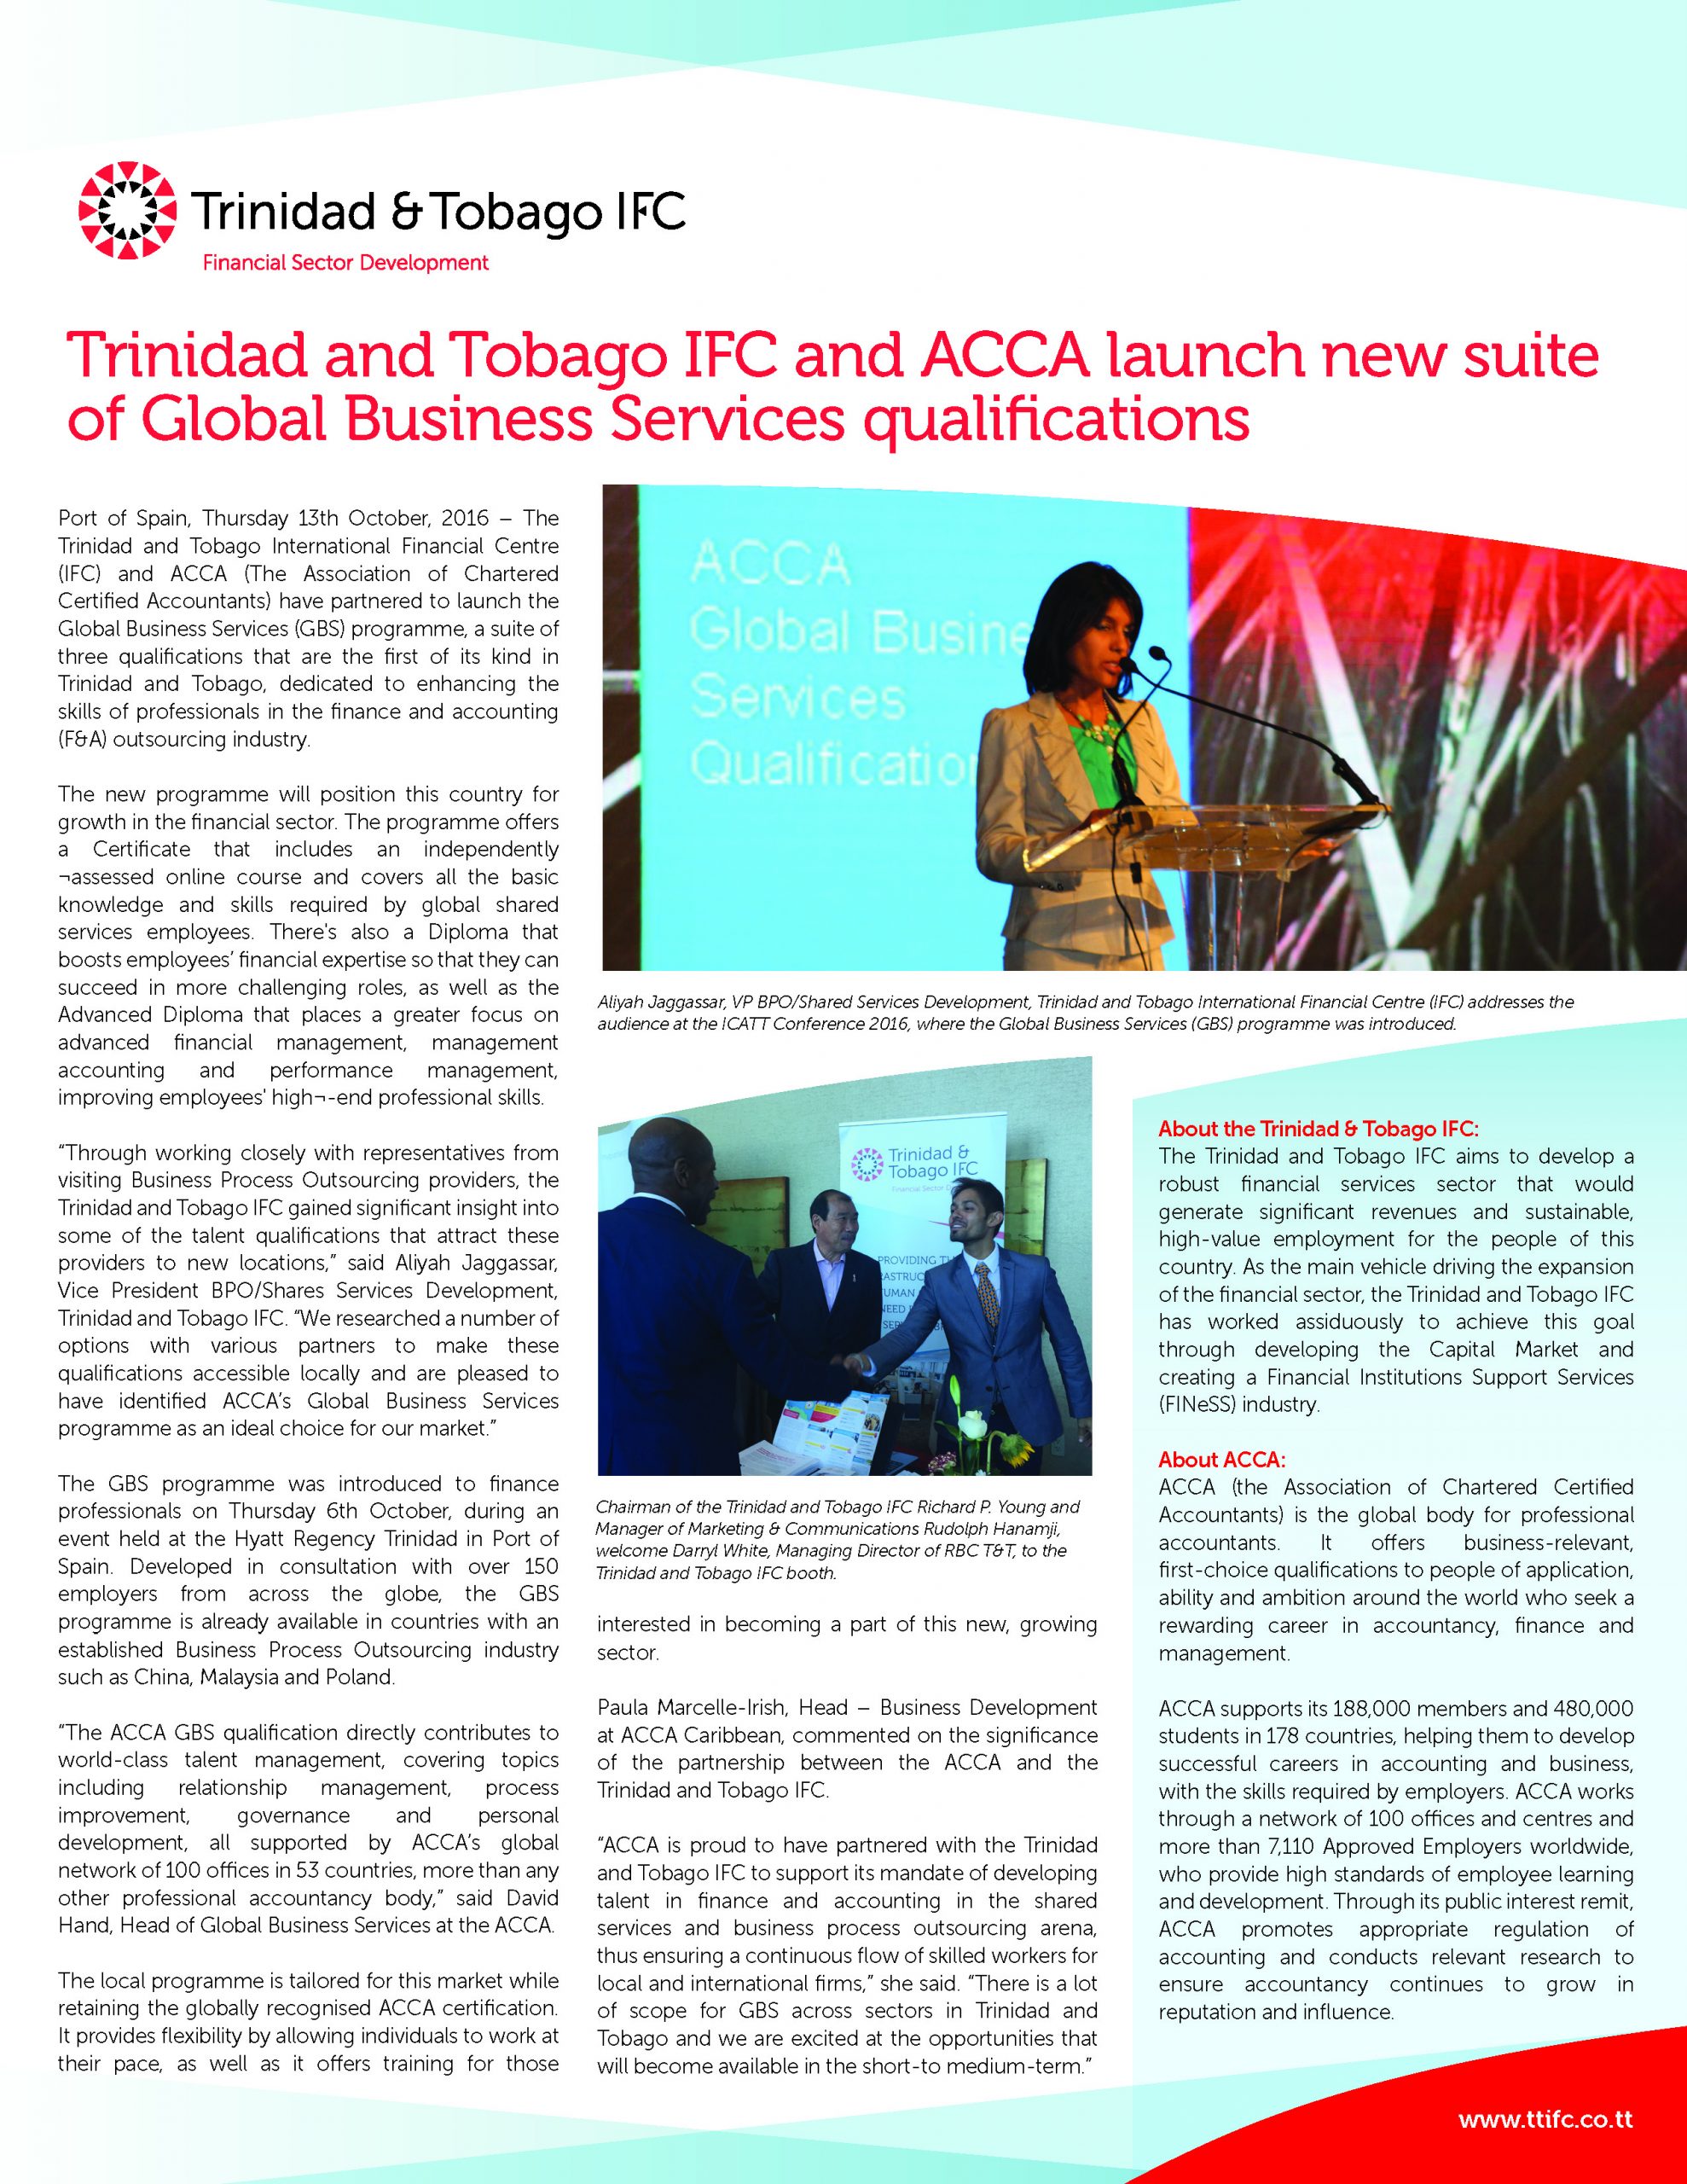 Trinidad and Tobago IFC and ACCA Launch